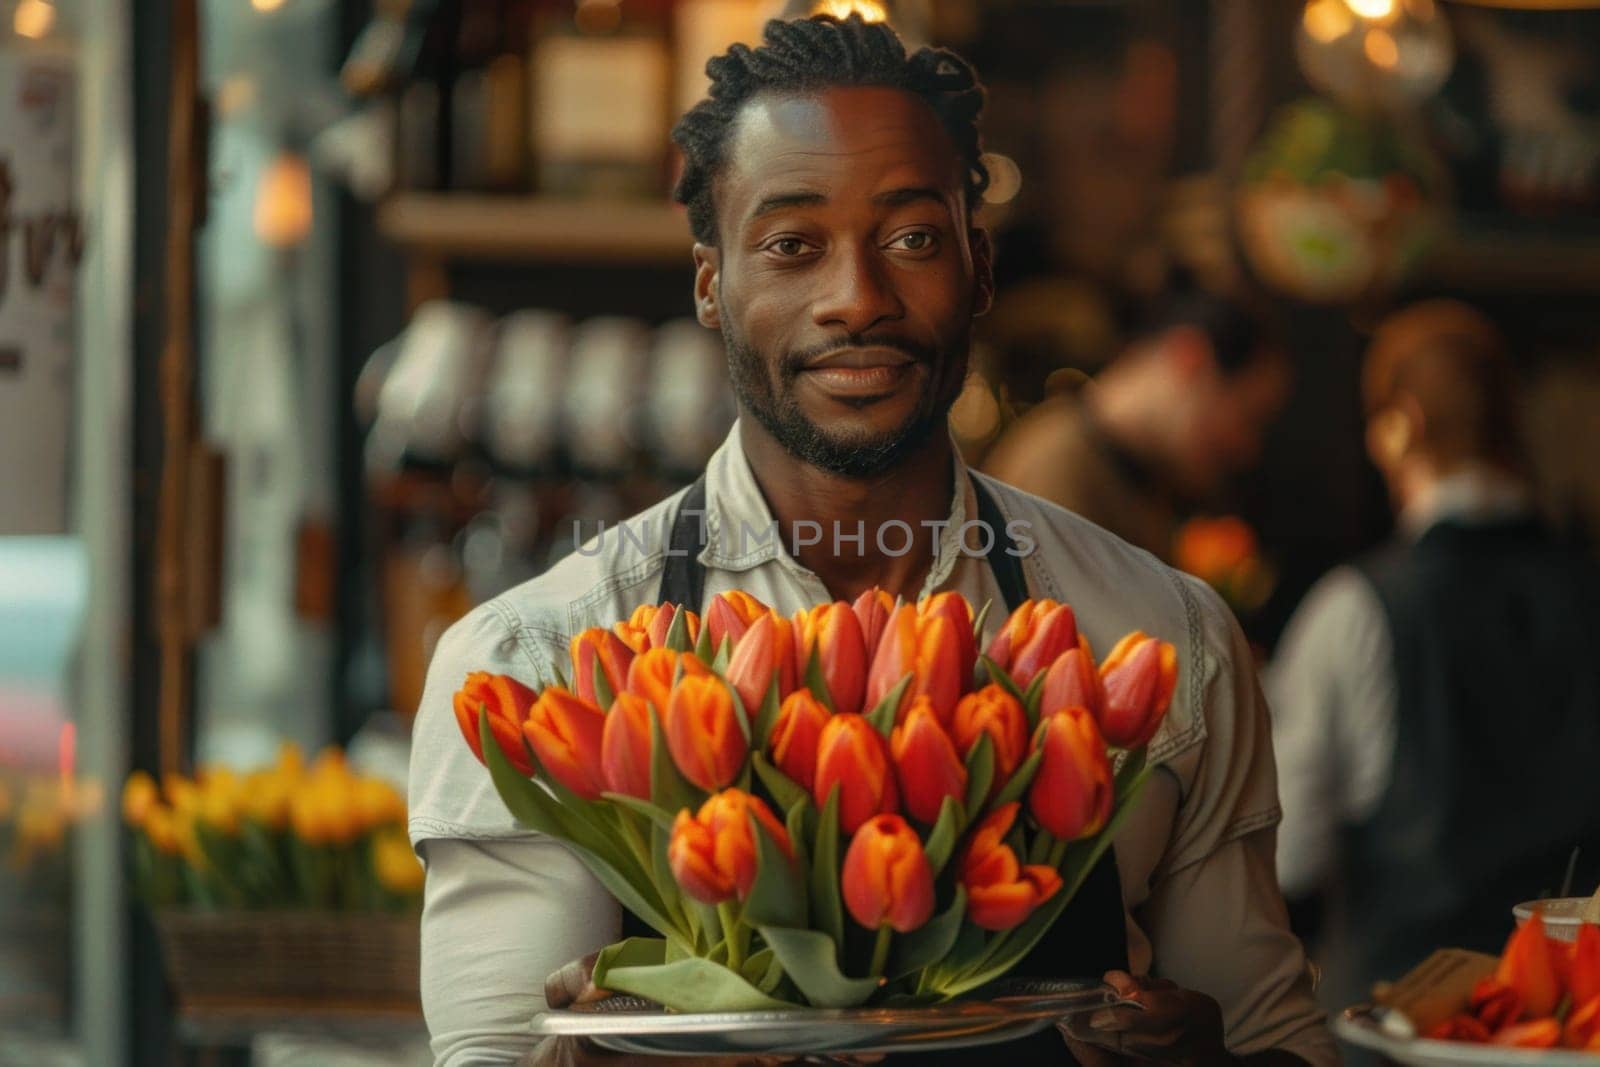 A man standing holding a plate filled with vibrant orange tulips in a bright setting.